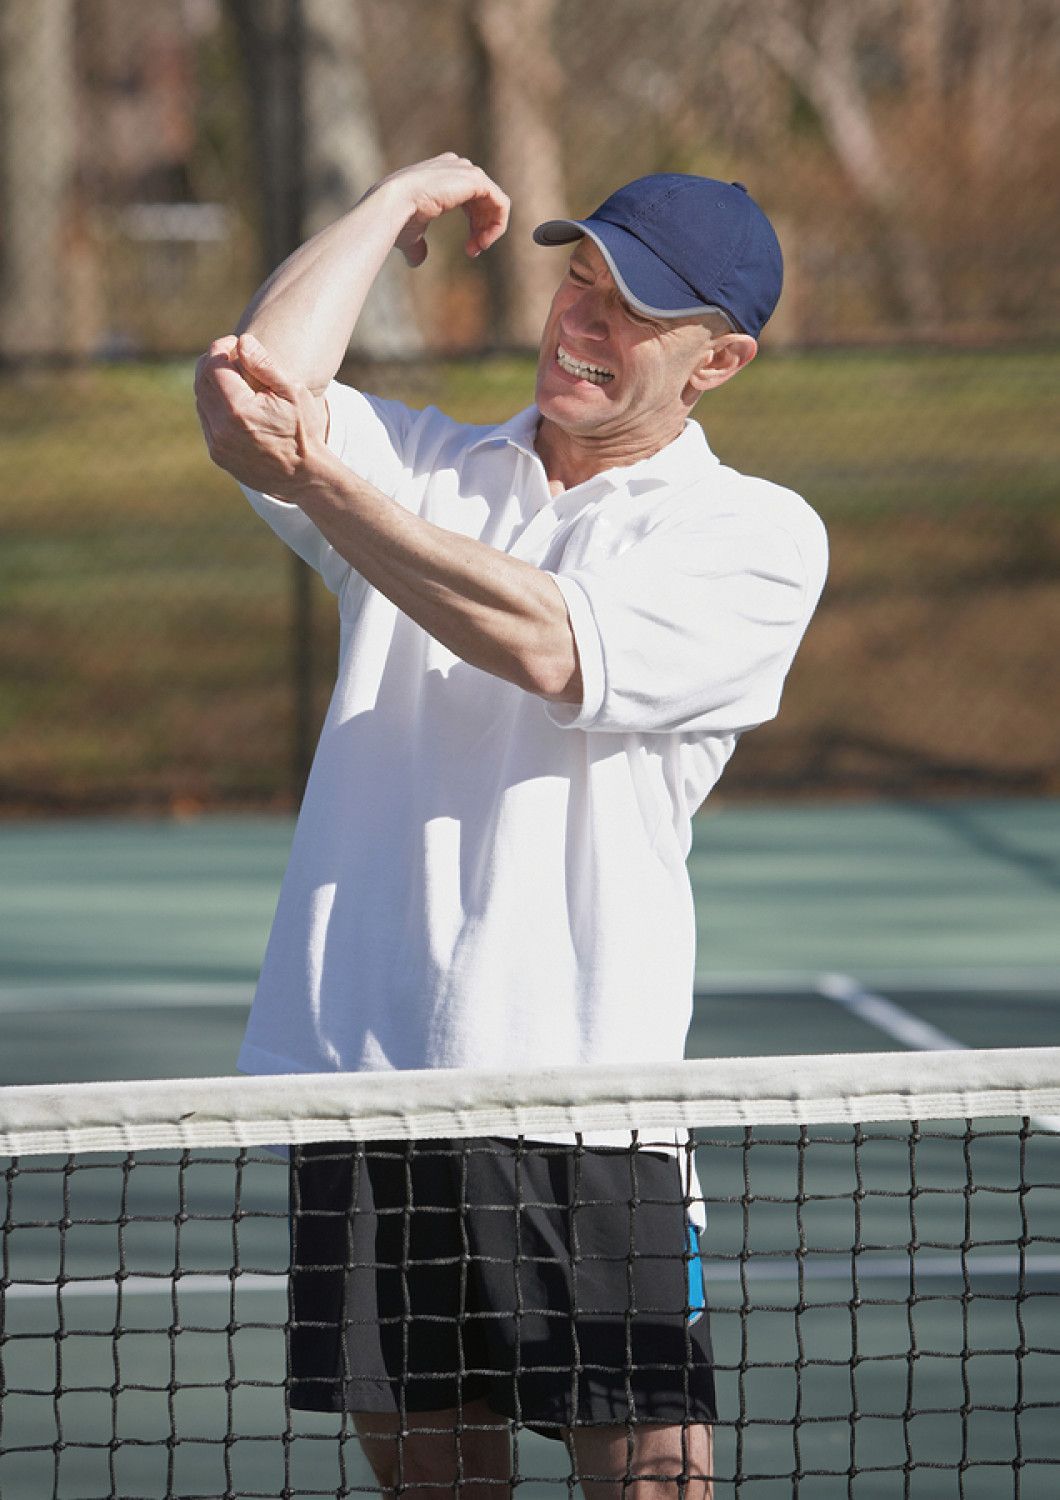 Tennis Player Suffering from Elbow Pain